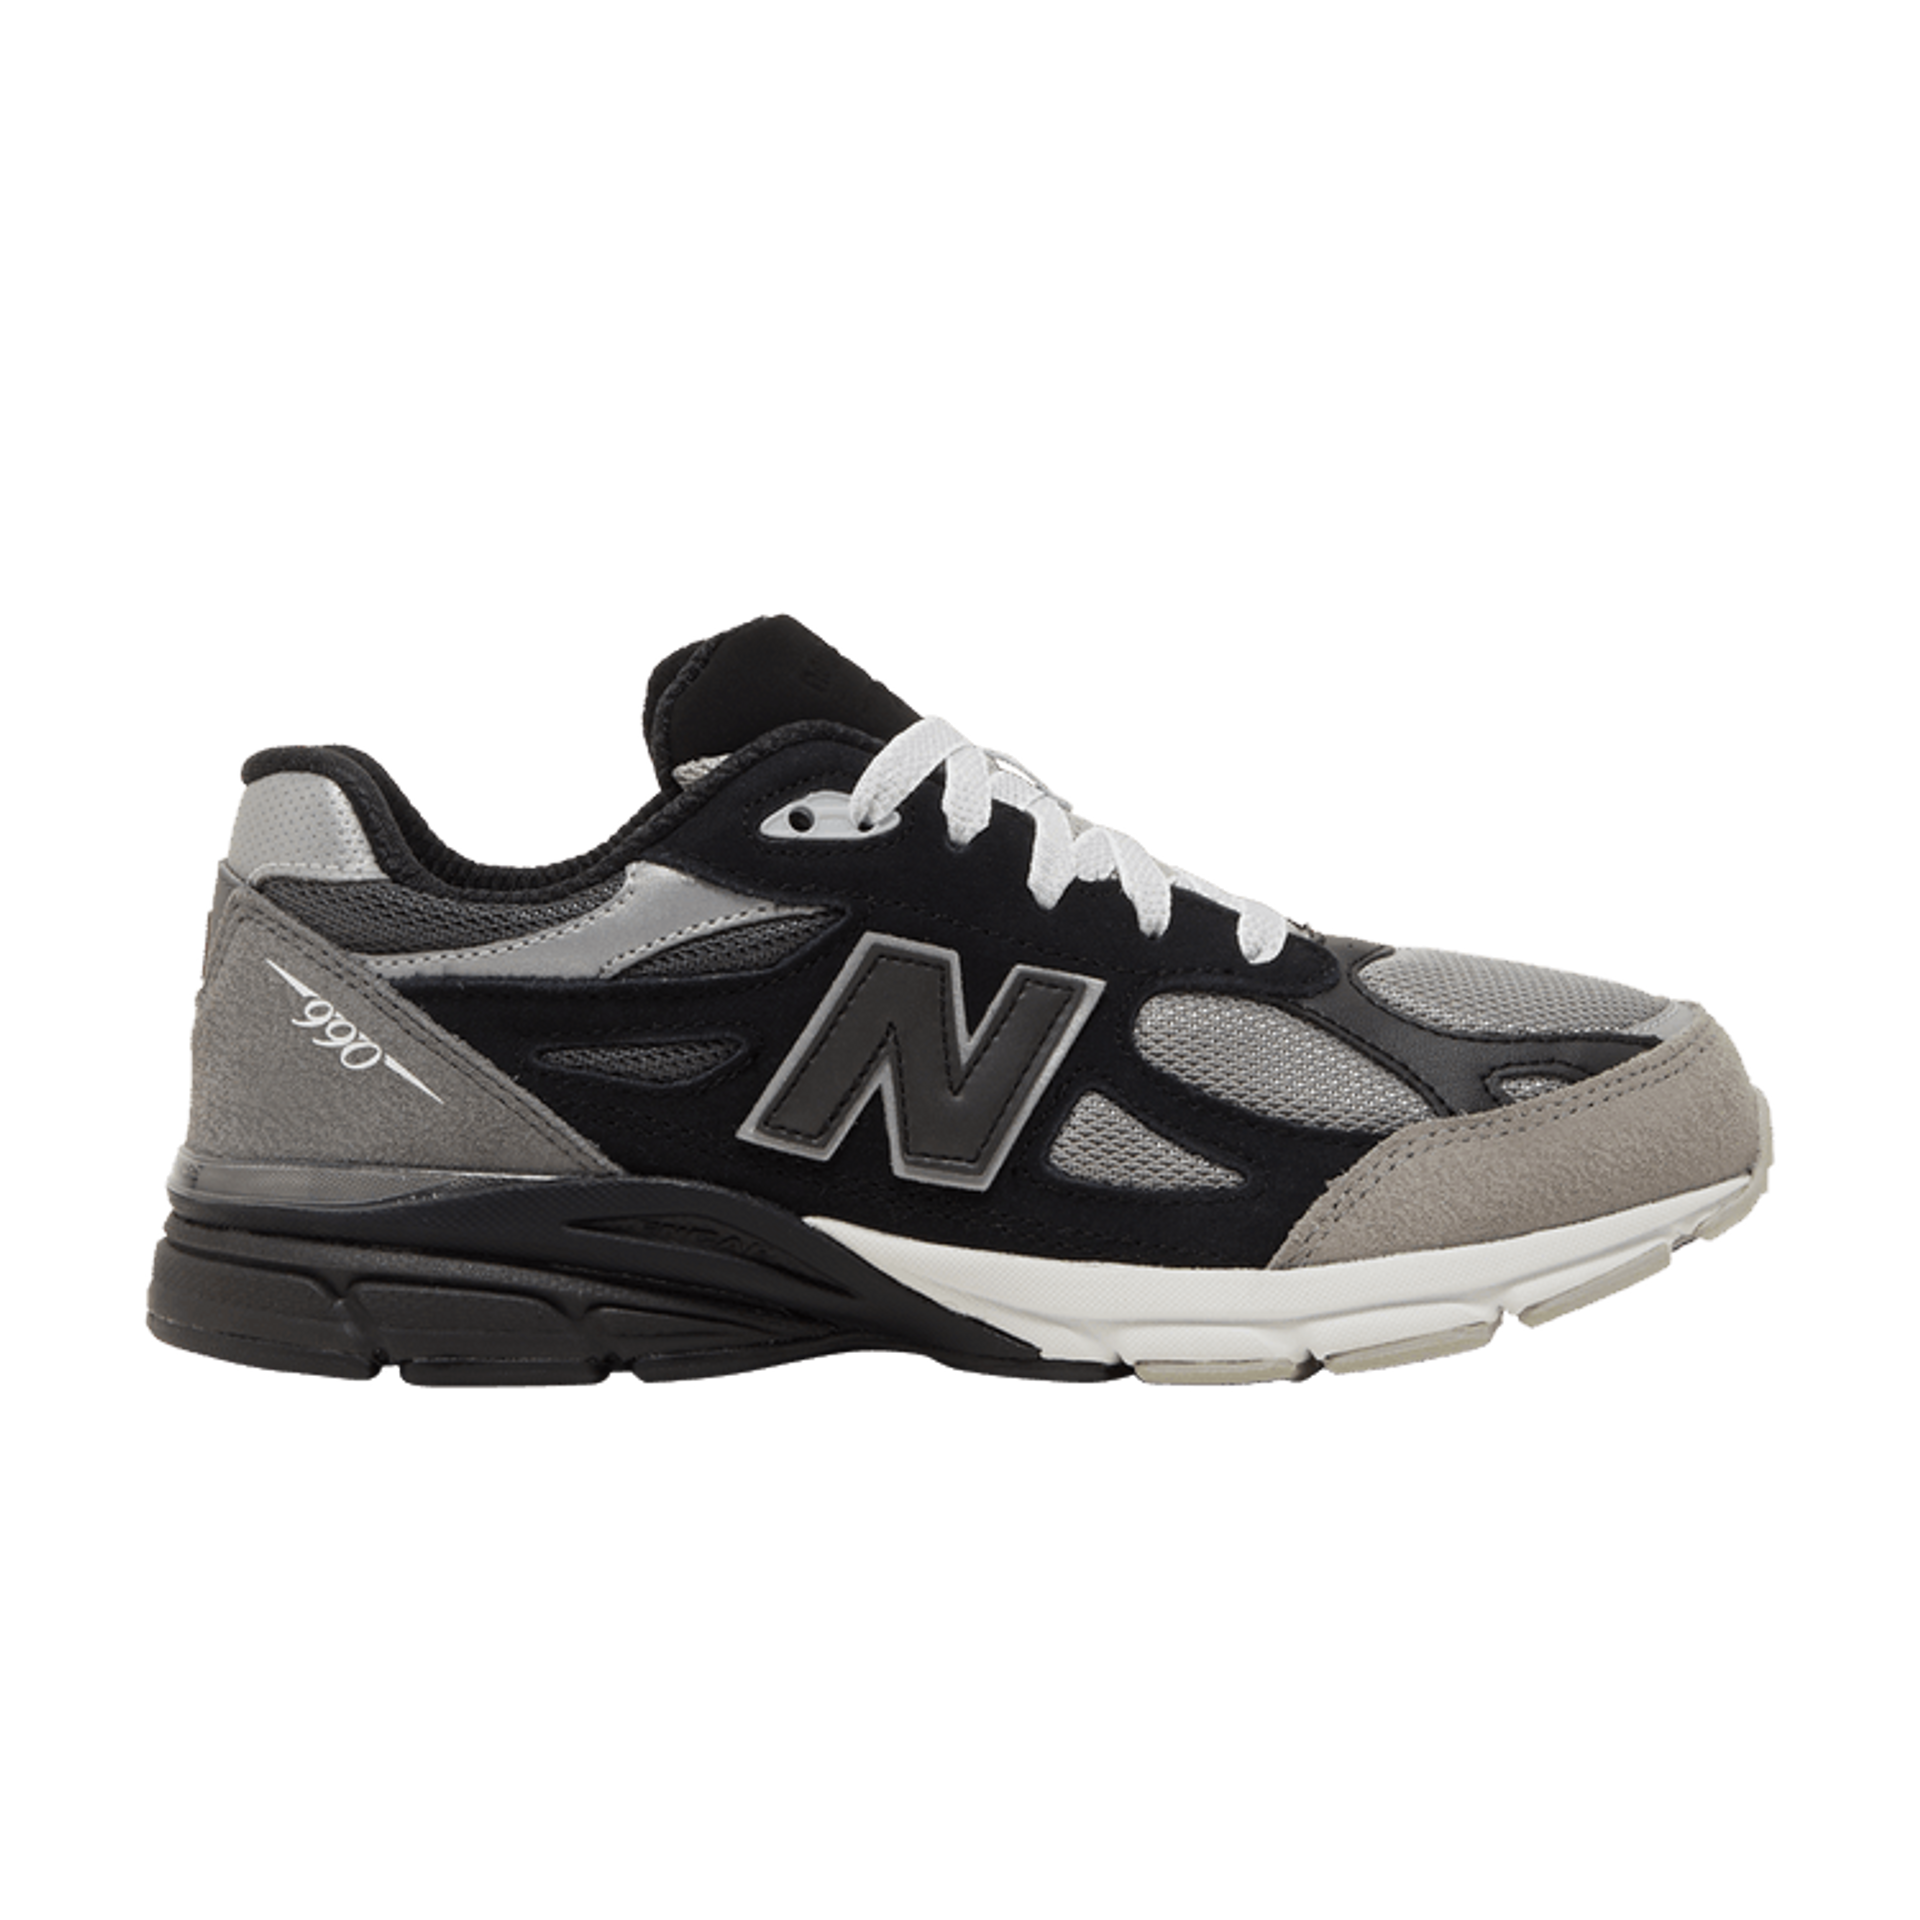 DTLR x New Balance 990v3 GS 'GR3YSCALE'